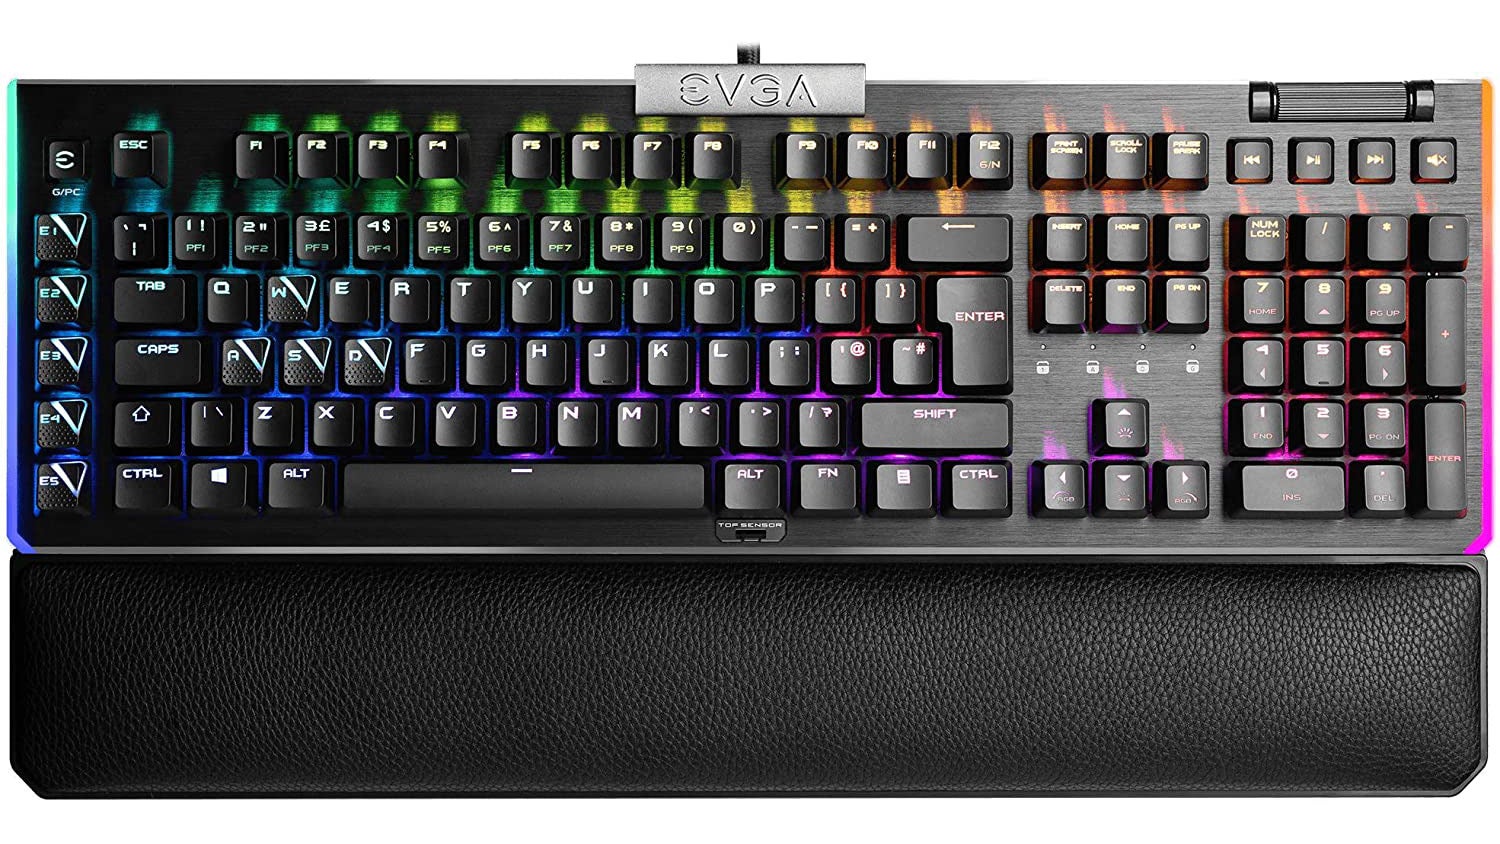 Get a critically-acclaimed optical mechanical keyboard for £52.79